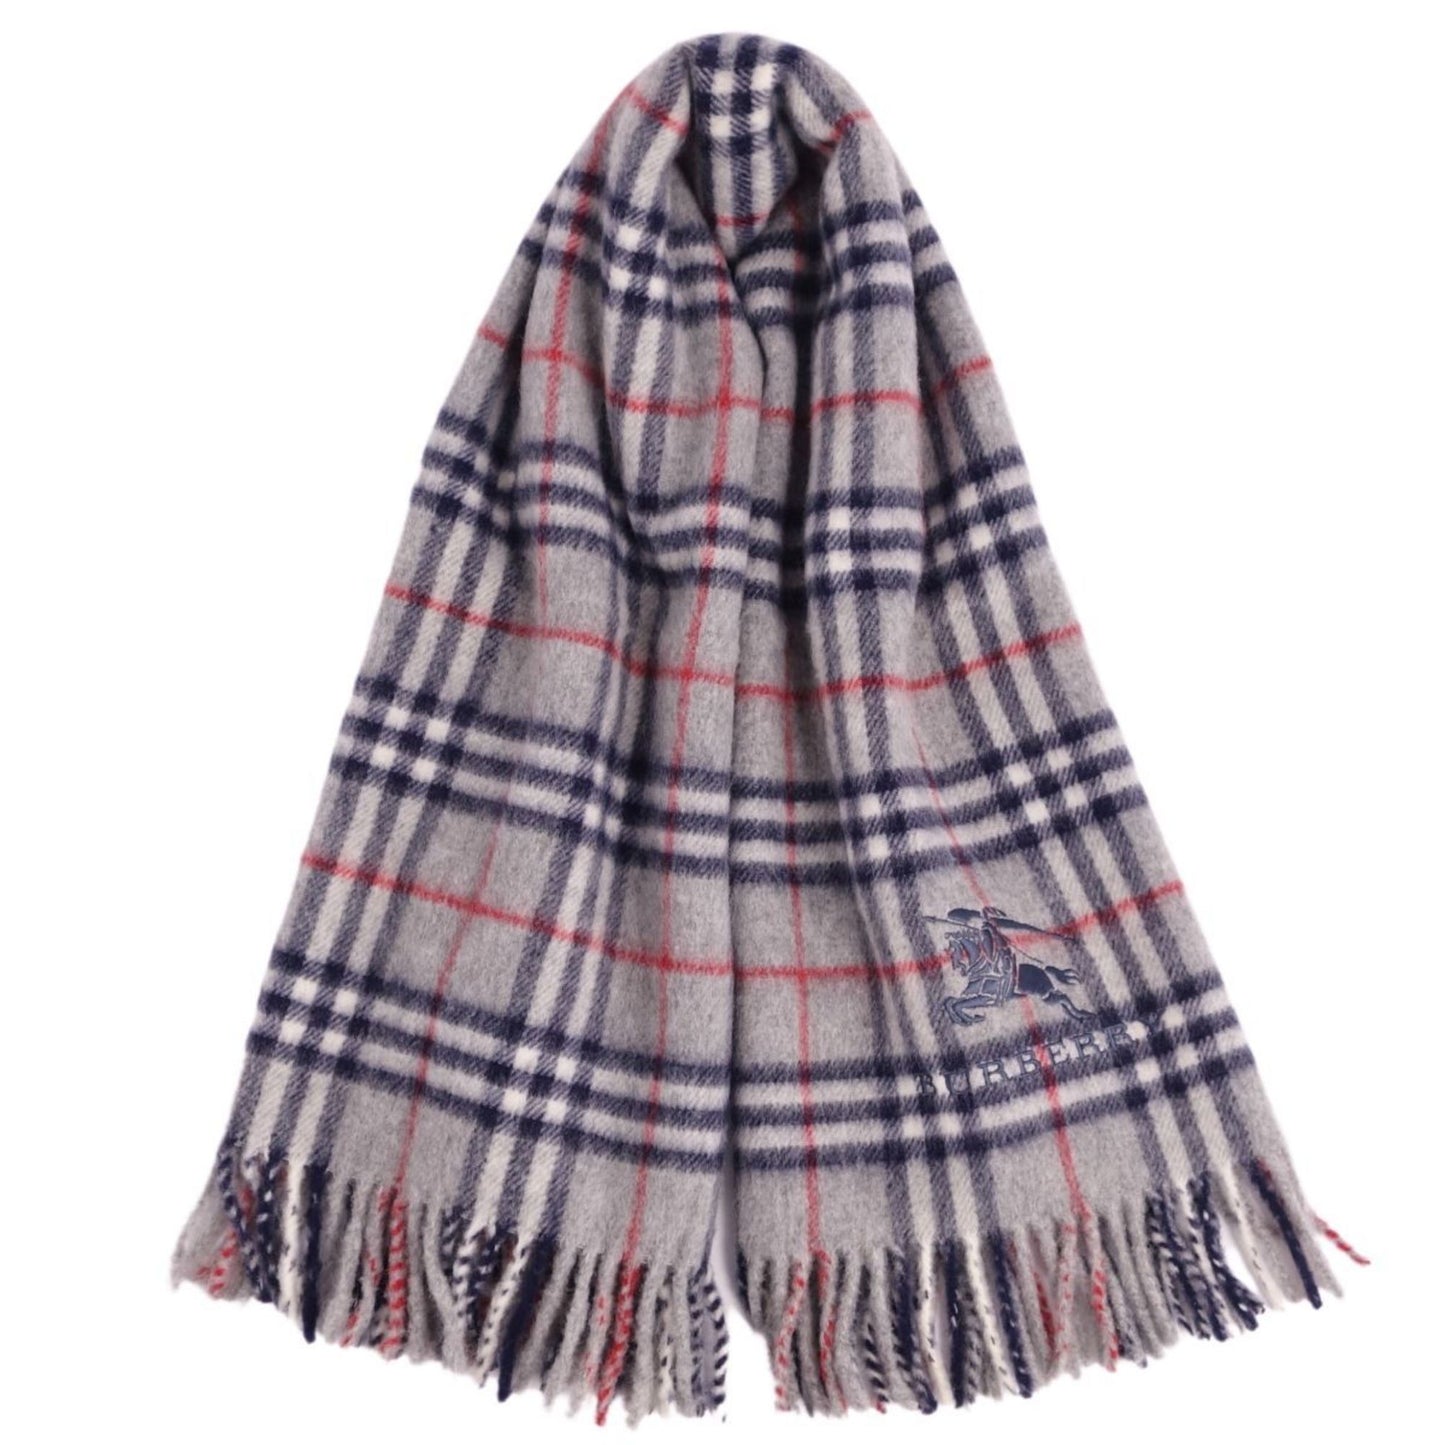 Burberry Women's Gray Wool Stole for Women - Elegant and Warm Accessory in Grey